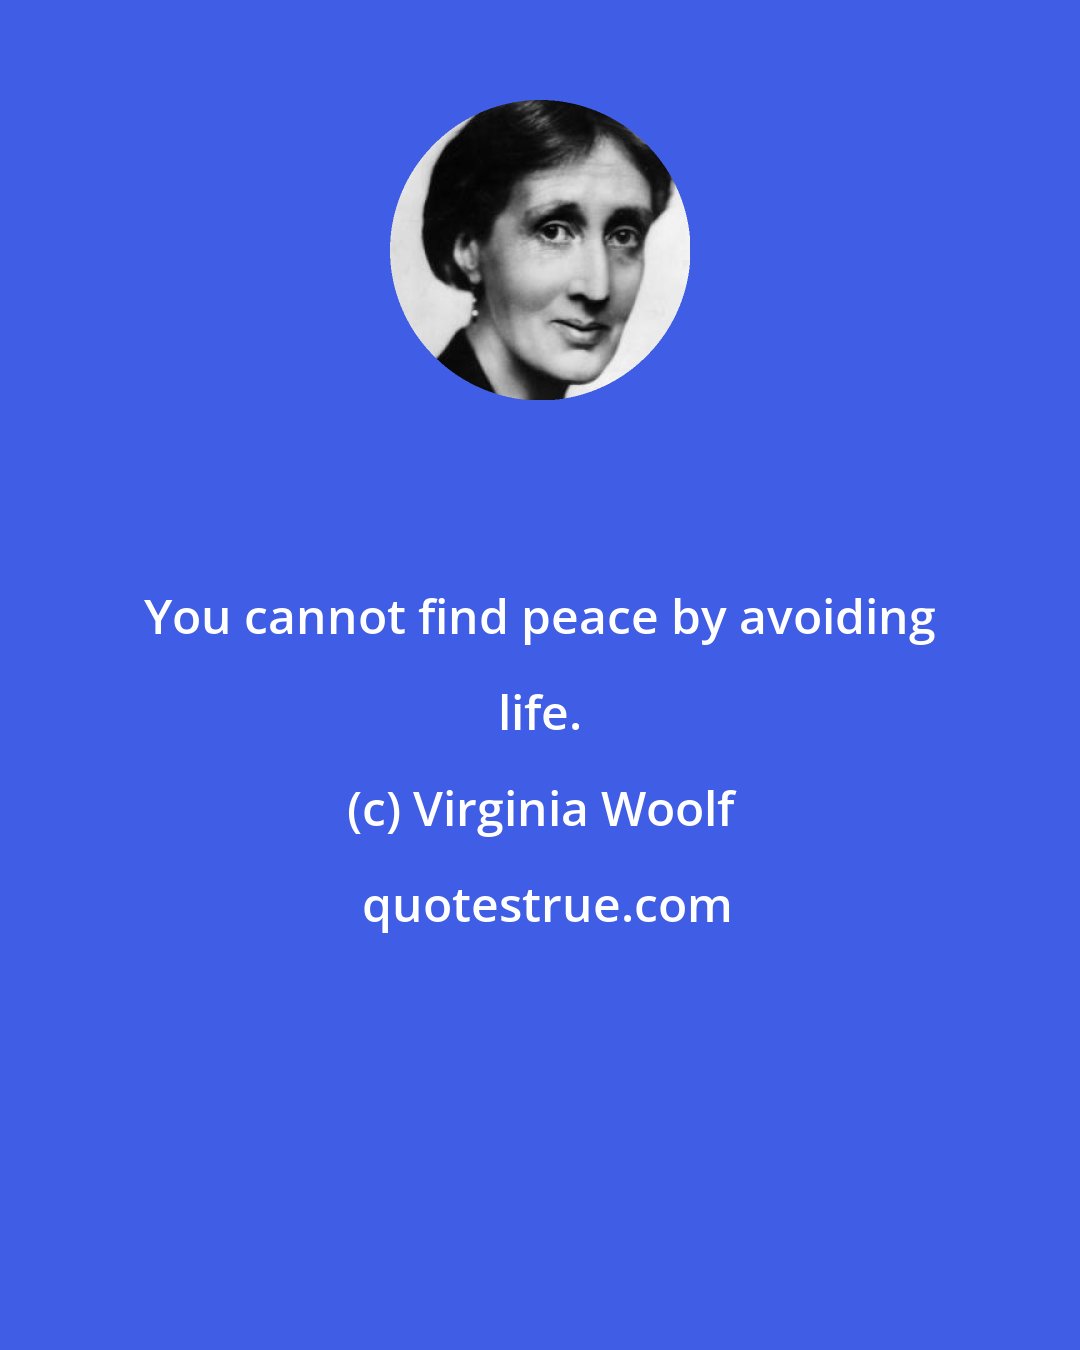 Virginia Woolf: You cannot find peace by avoiding life.